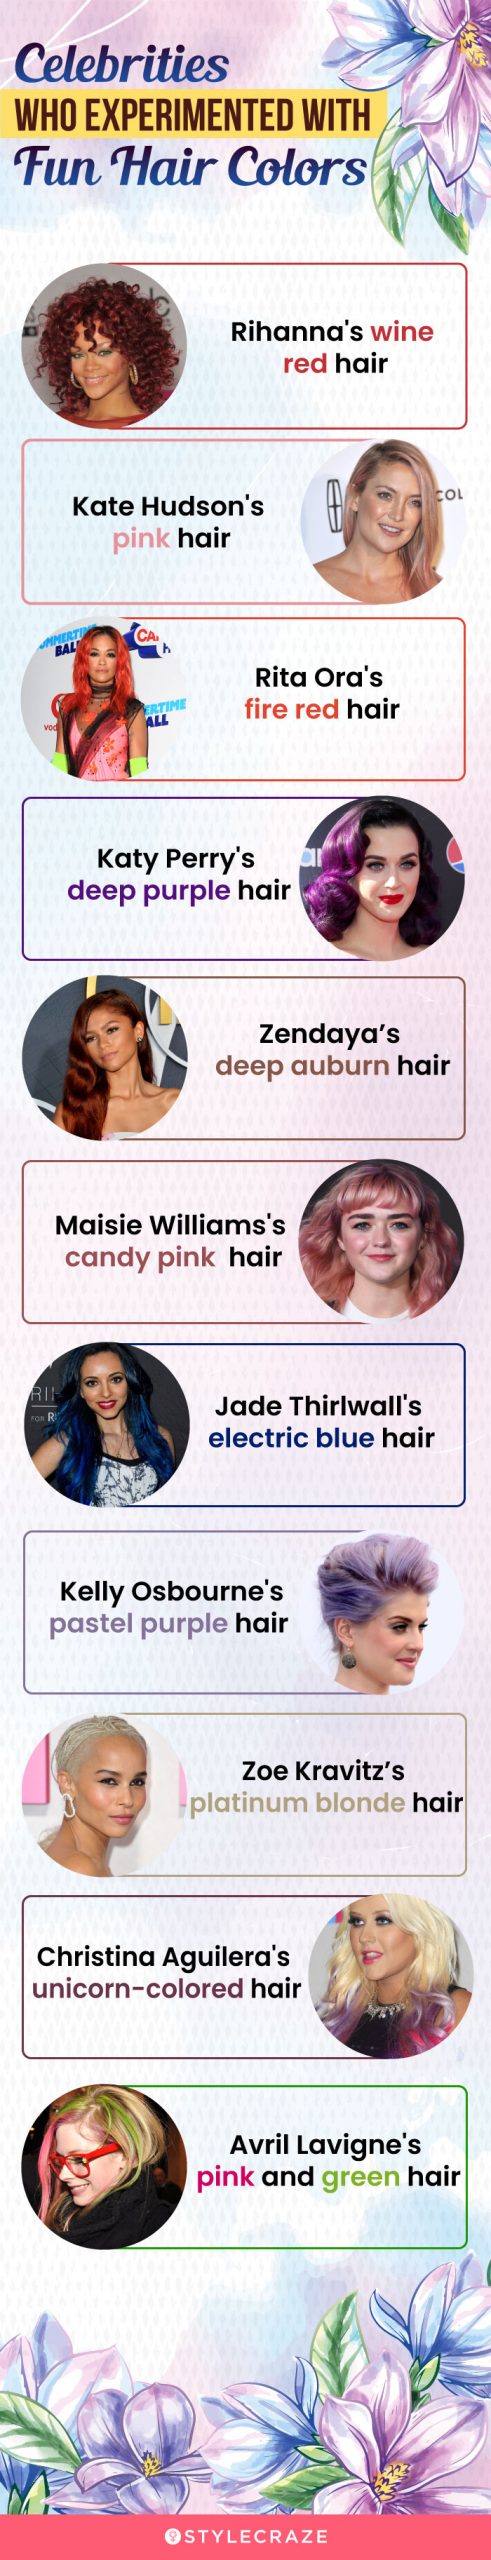 celebrities who experimented with fun hair colors [infographic]